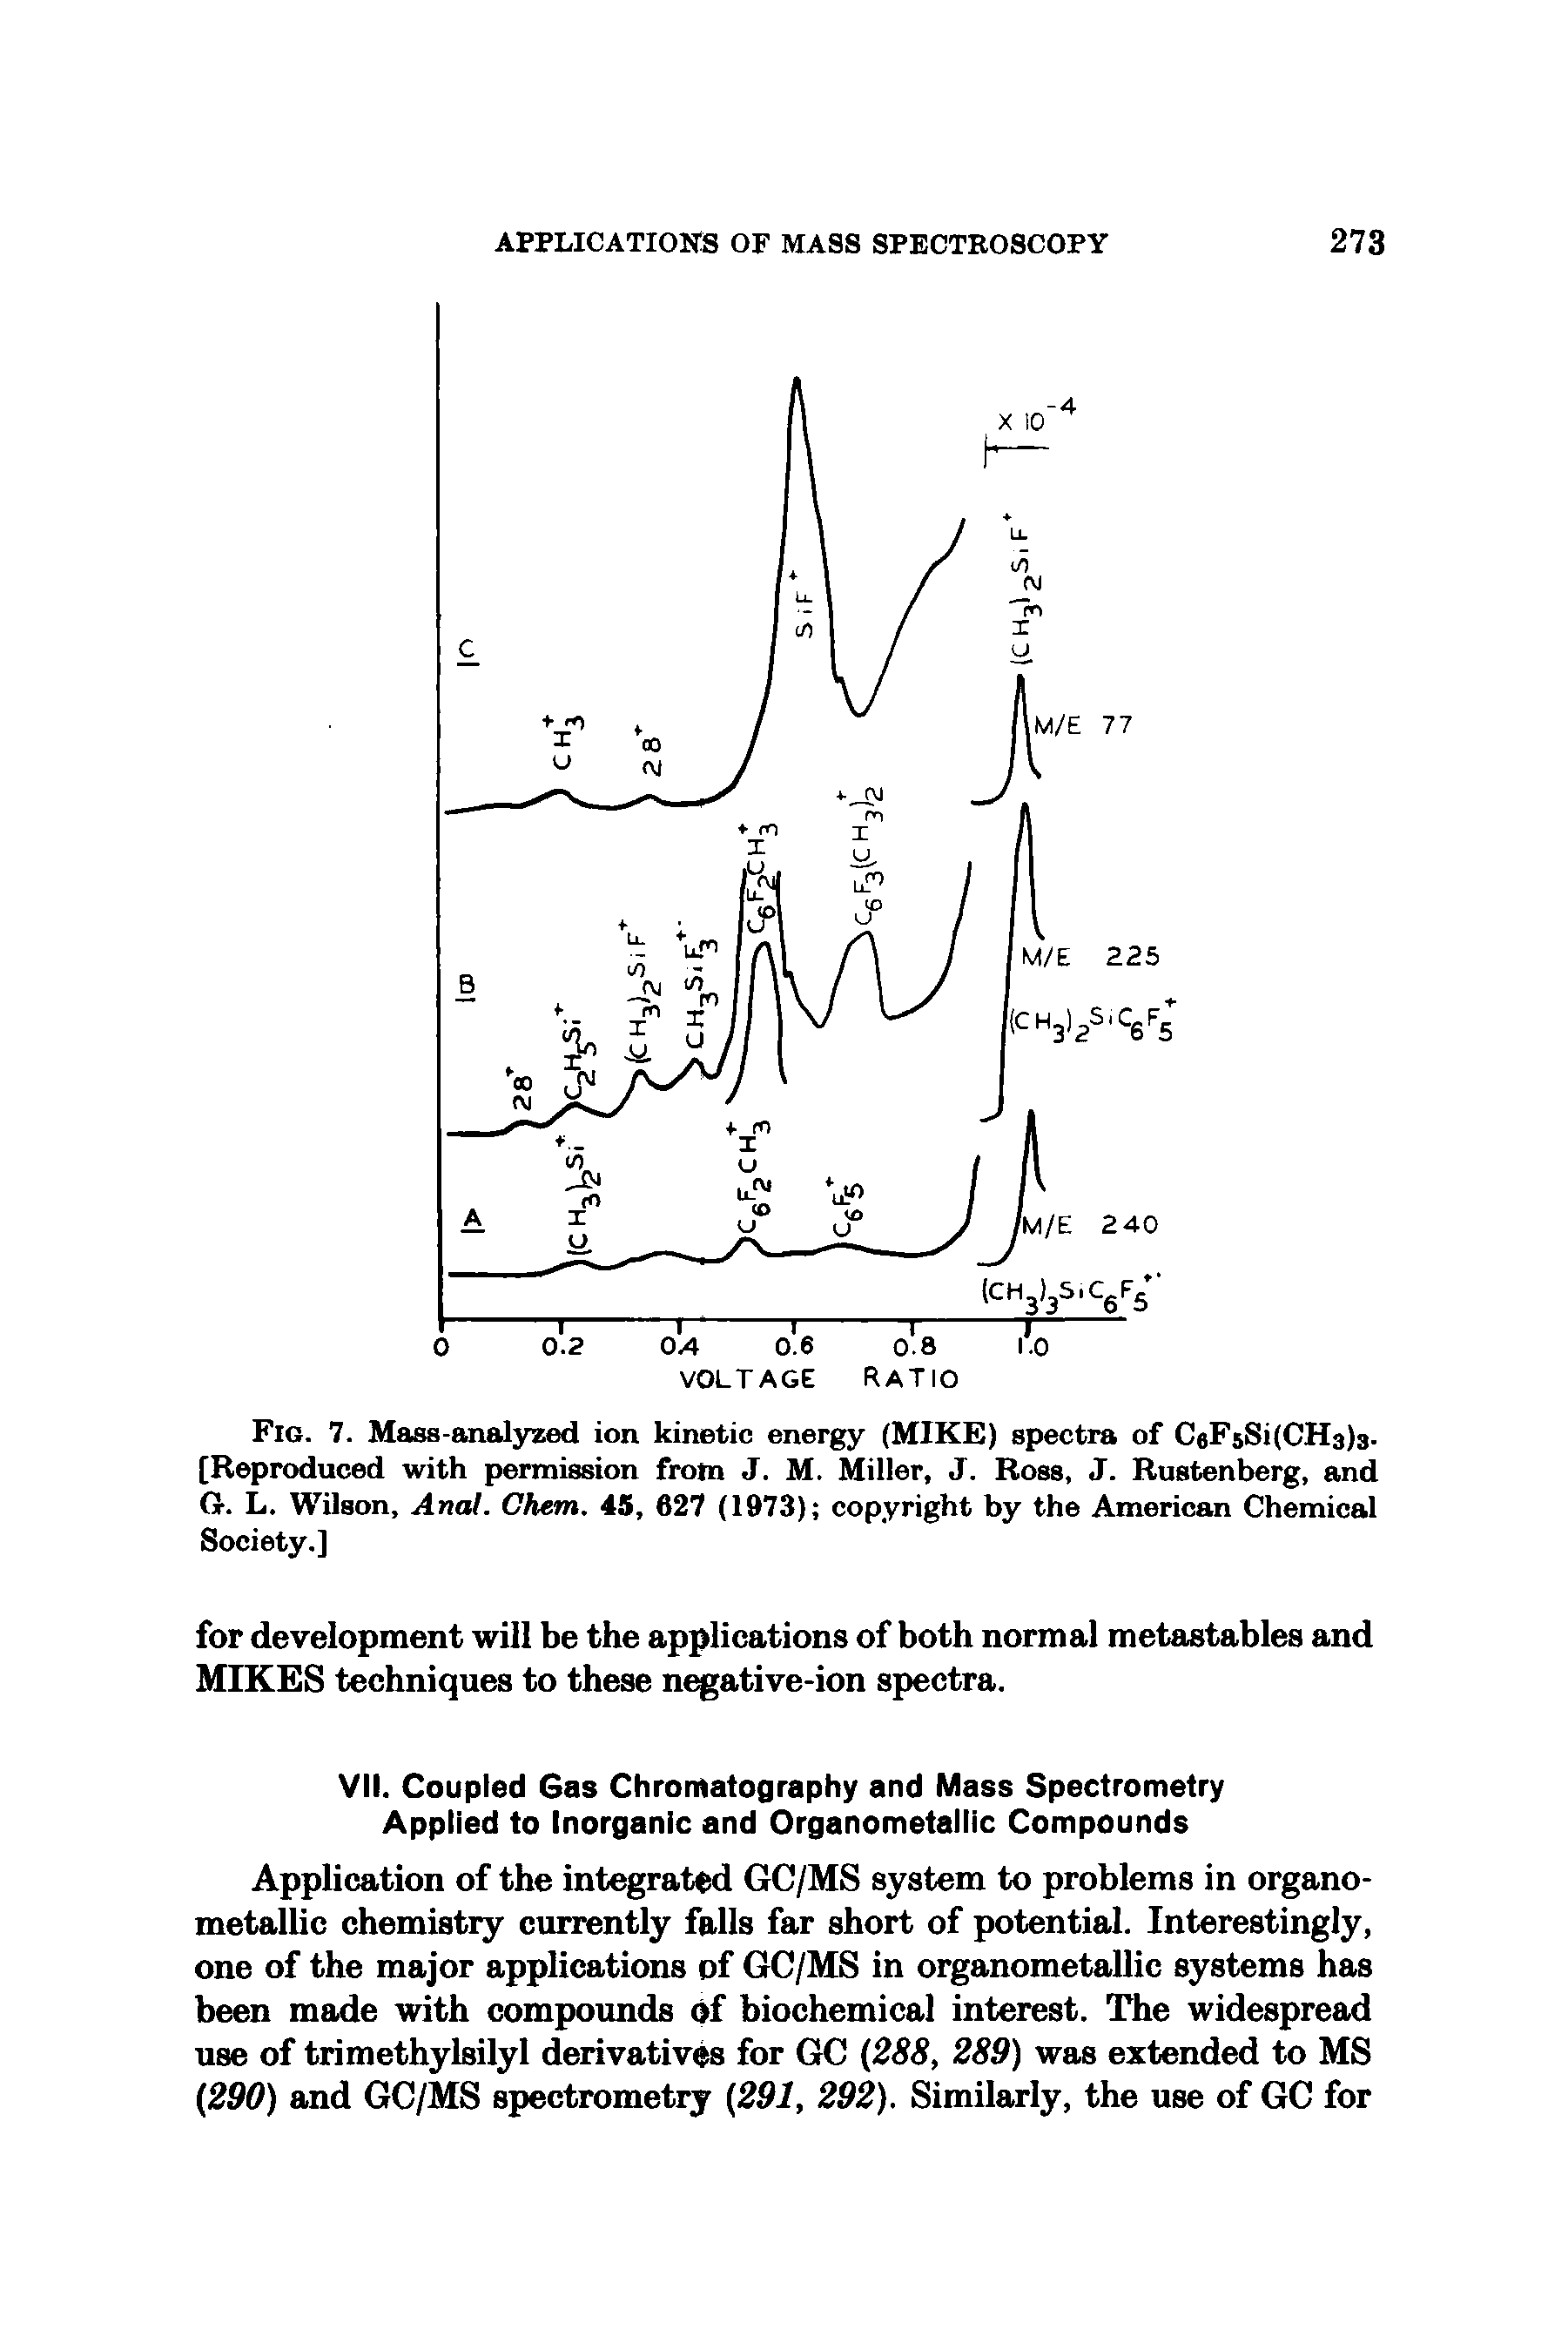 Fig. 7. Mass-analyzed ion kinetic energy (MIKE) spectra of C6FsSi(CH3)3. [Reproduced with permission from J. M. Miller, J. Ross, J. Rustenberg, and G-. L. Wilson, Anal. Chem. 45, 627 (1973) copyright by the American Chemical Society.]...